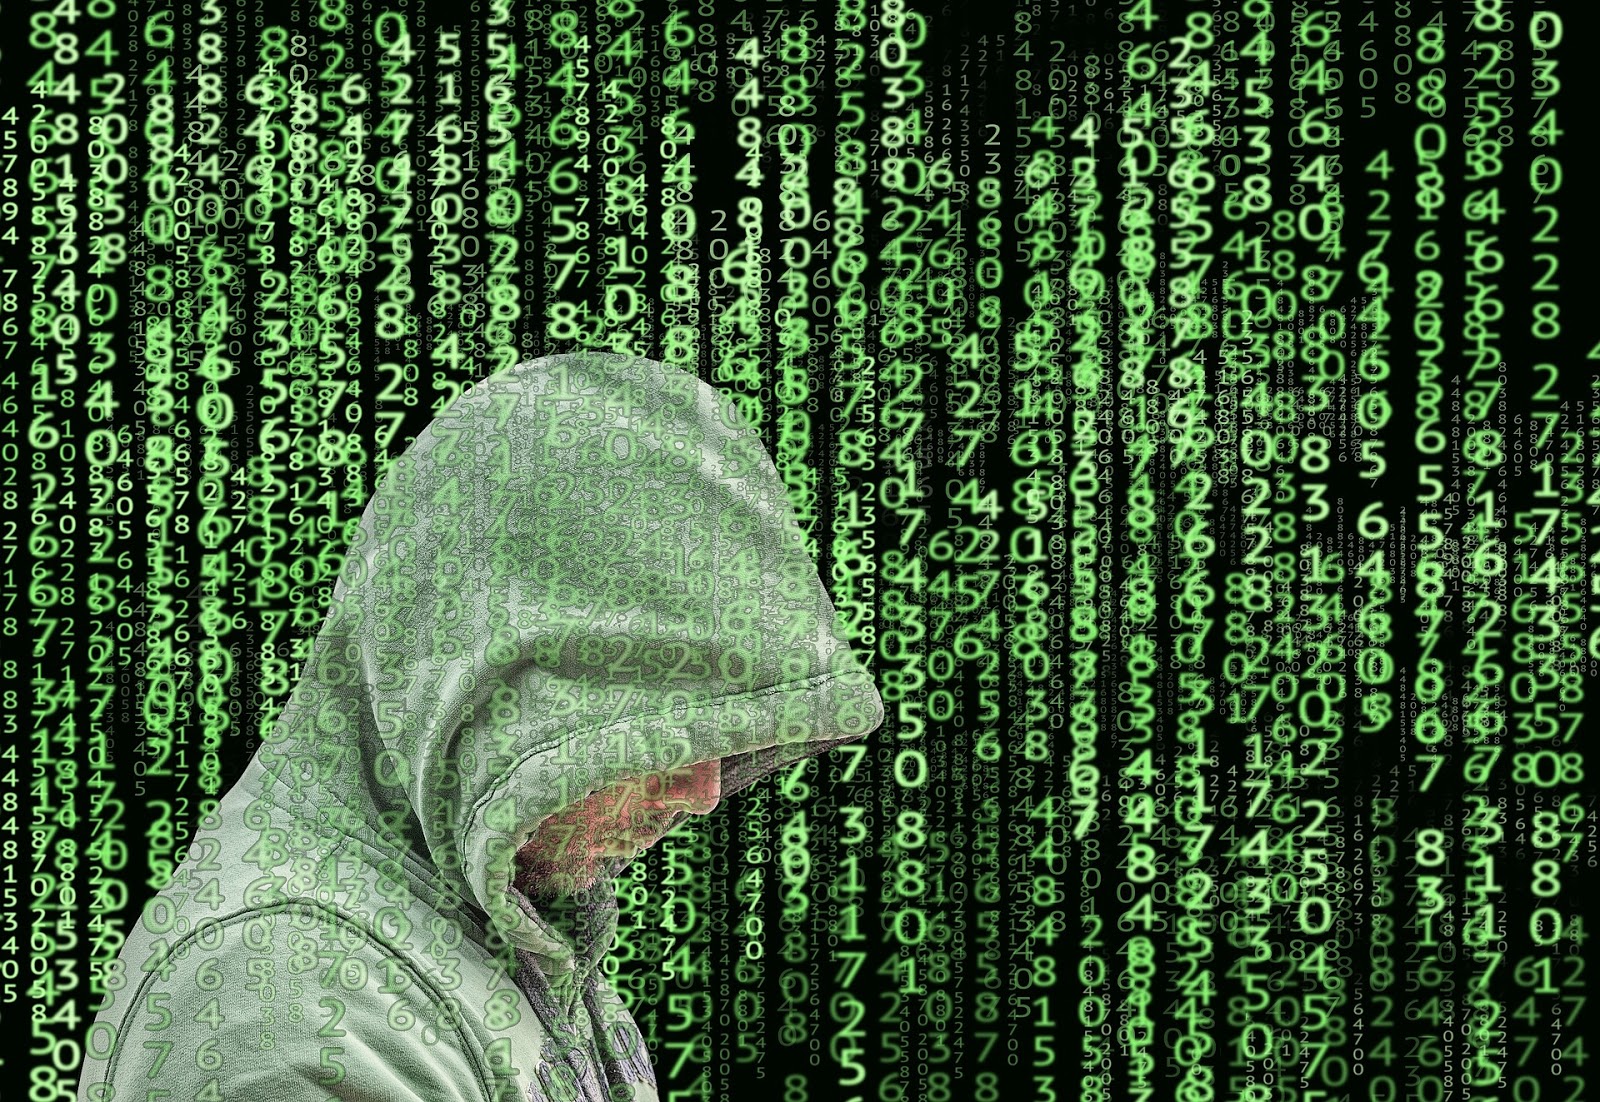 Cybercrime payouts dwarf the old-style robberies